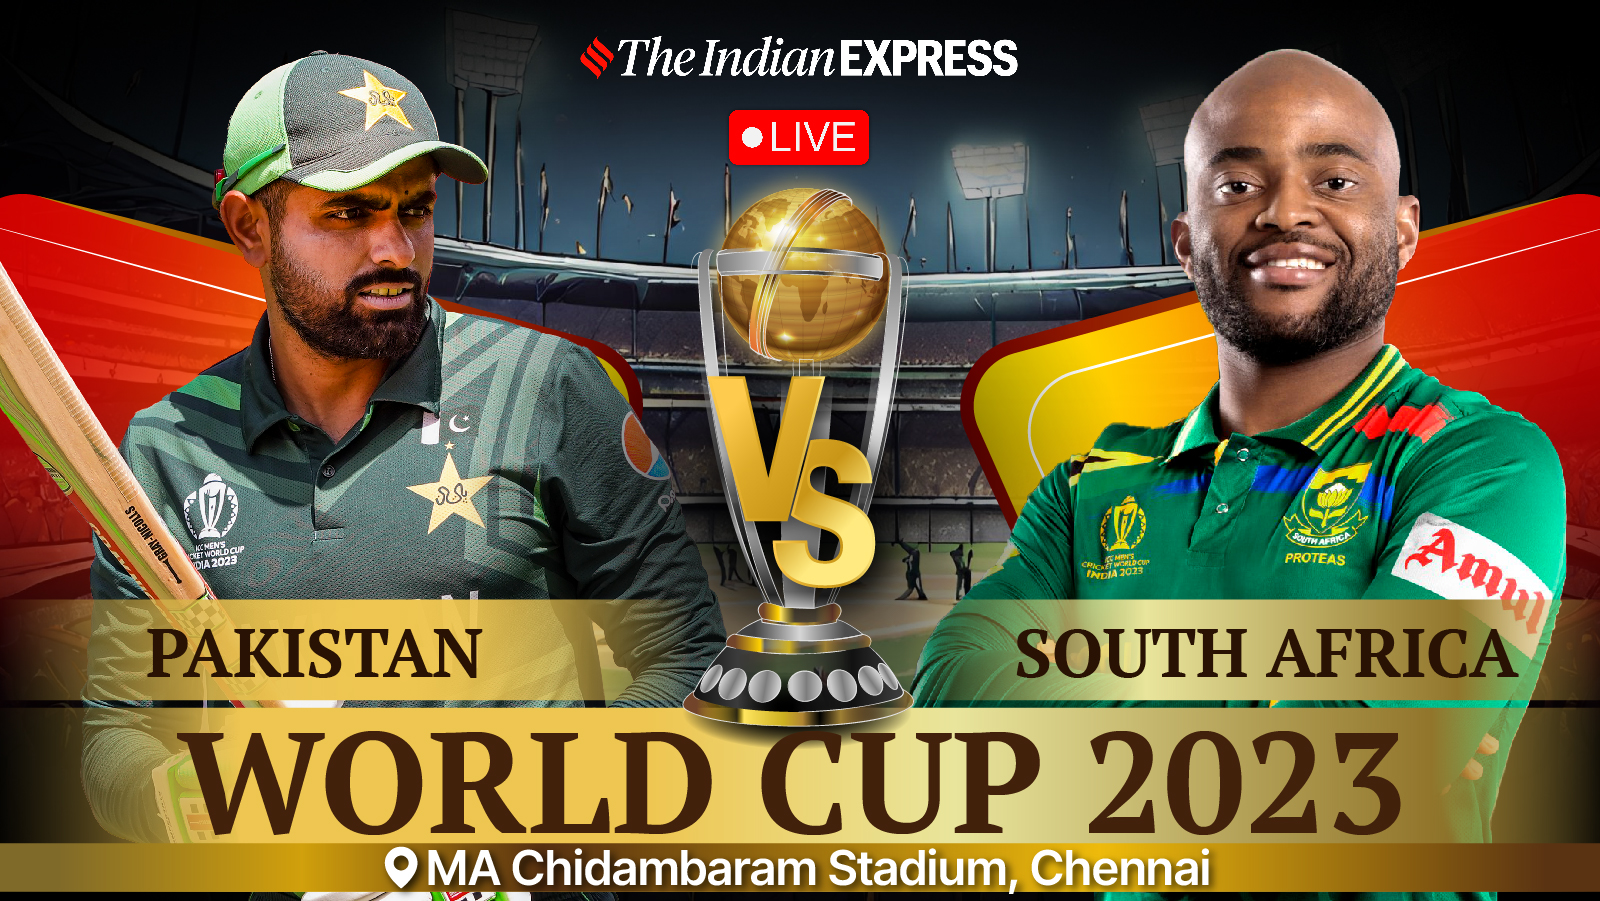 Pakistan vs South Africa Live Score, World Cup 2023: Pakistan cross 150-run mark after losing half their side early | Cricket News